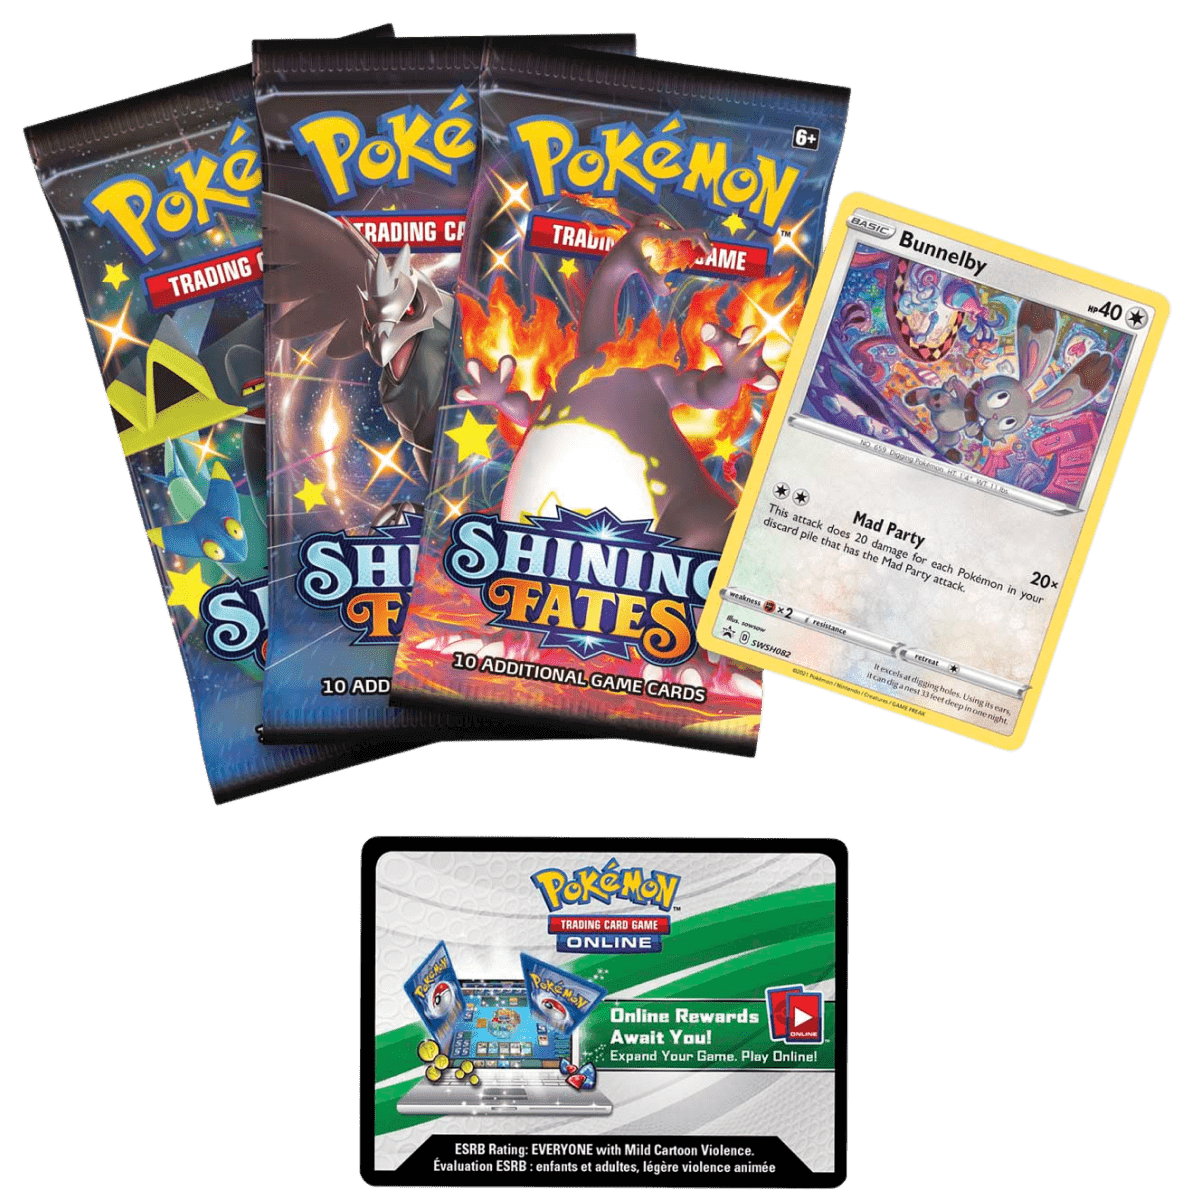 Pokemon TCG: Shining Fates Mad Party Pin Collection Box - Bunnelby - The Card Vault